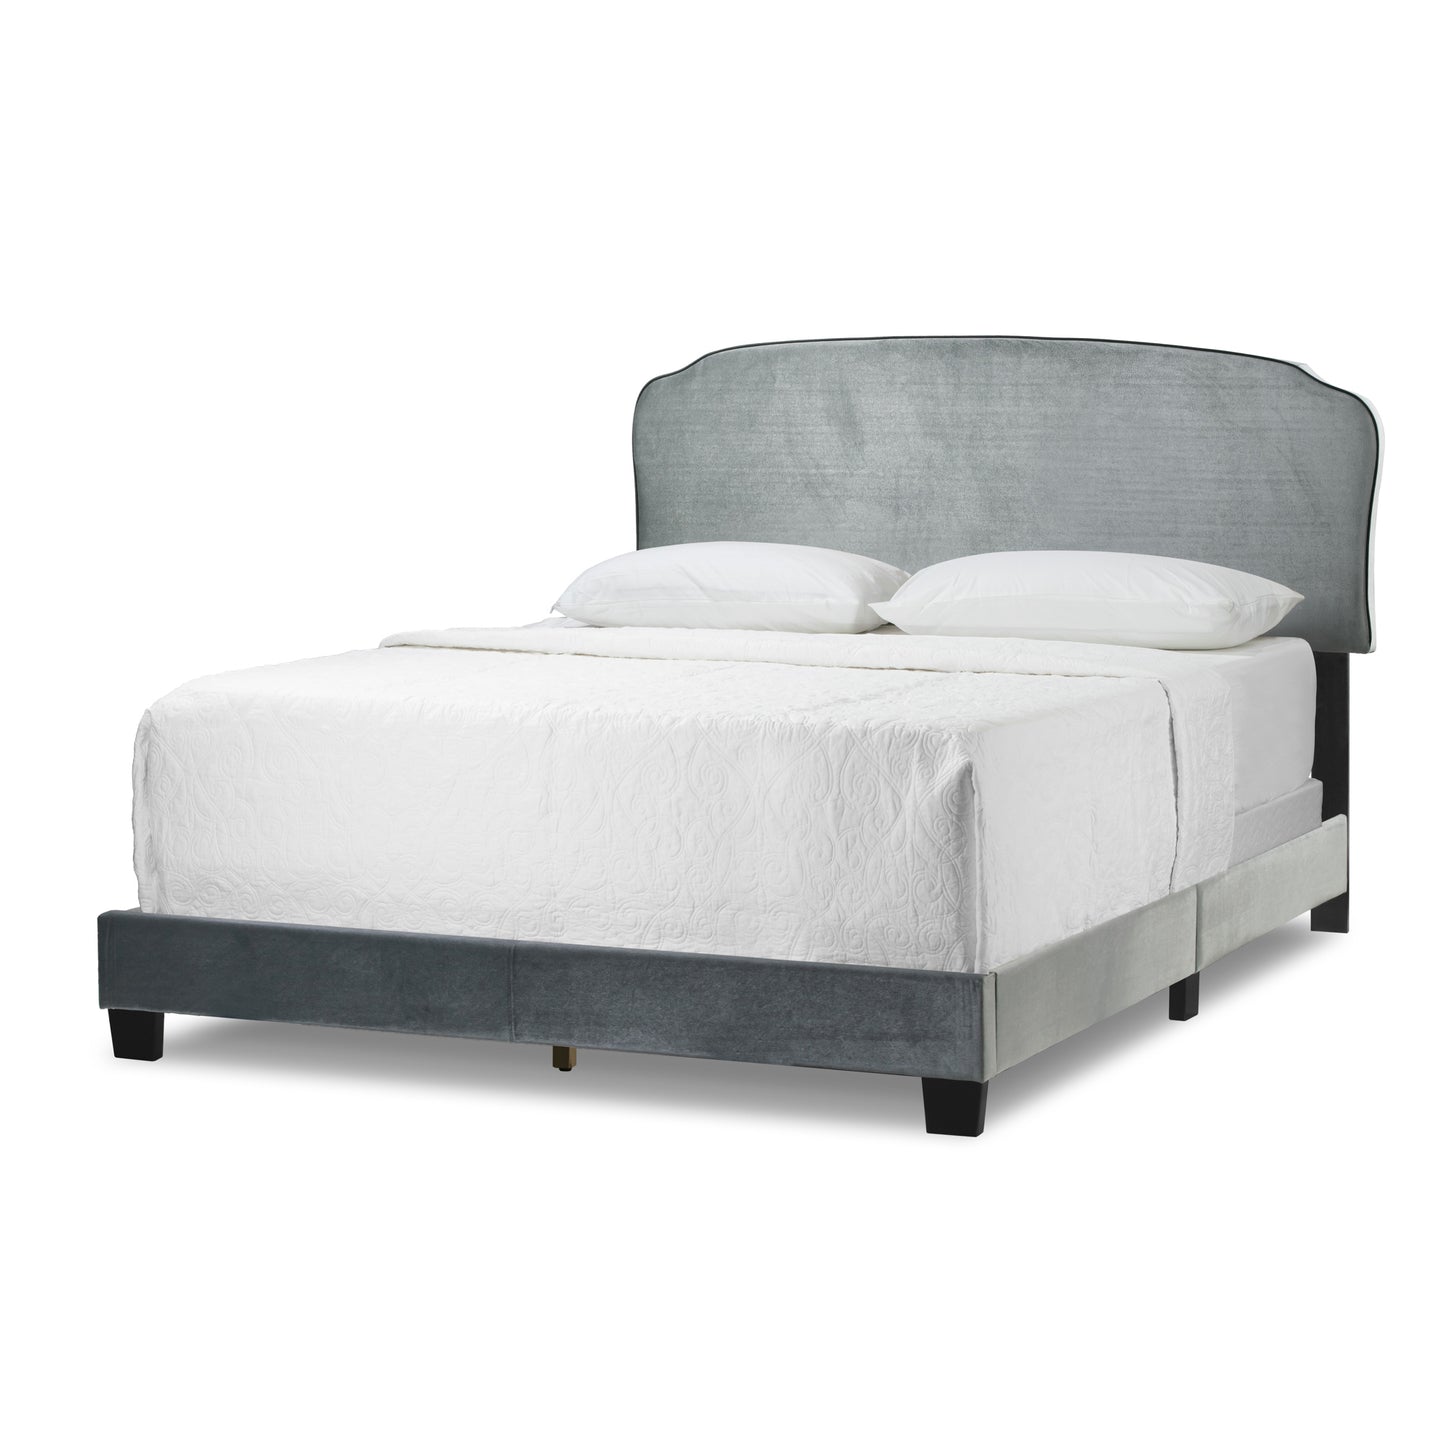 Aric Silver Grey Velvet Queen Bed with Contrasting Piping Accent